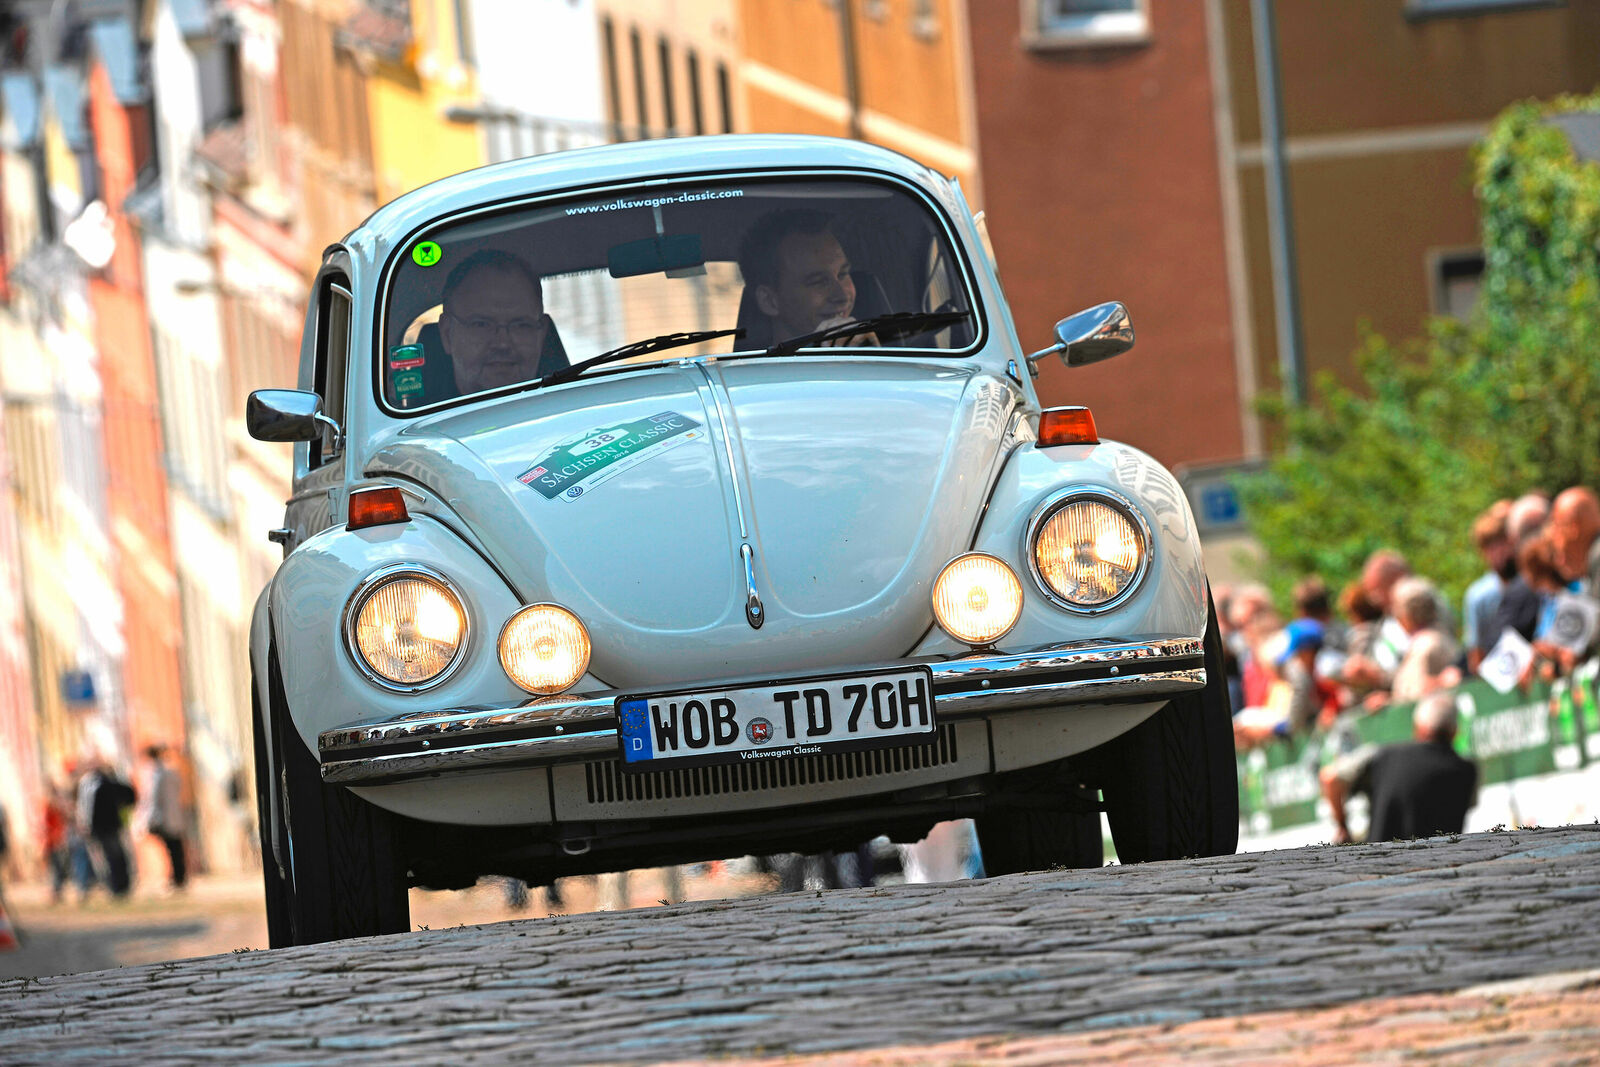 Volkswagen on tour this summer at the 2018 Sachsen Classic